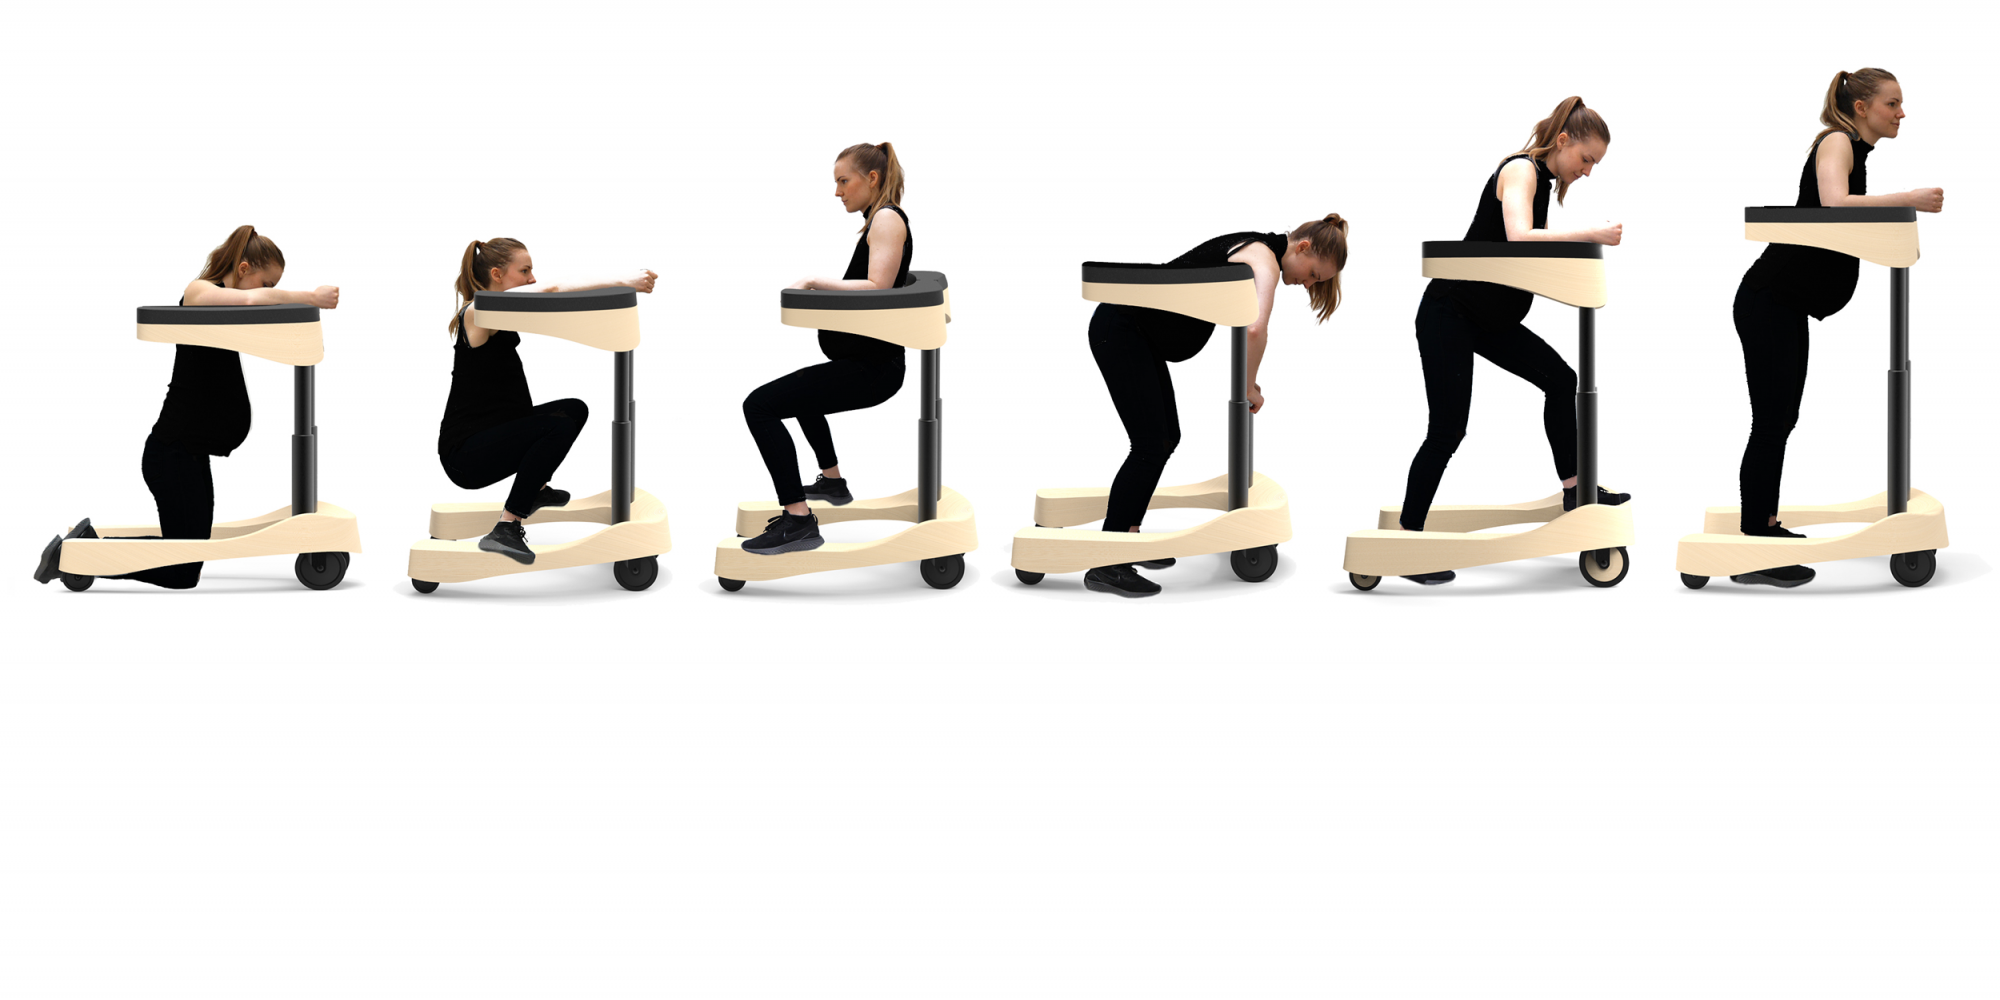 Woman stand is 6 different upright birthing positions with the support of a birthing aid